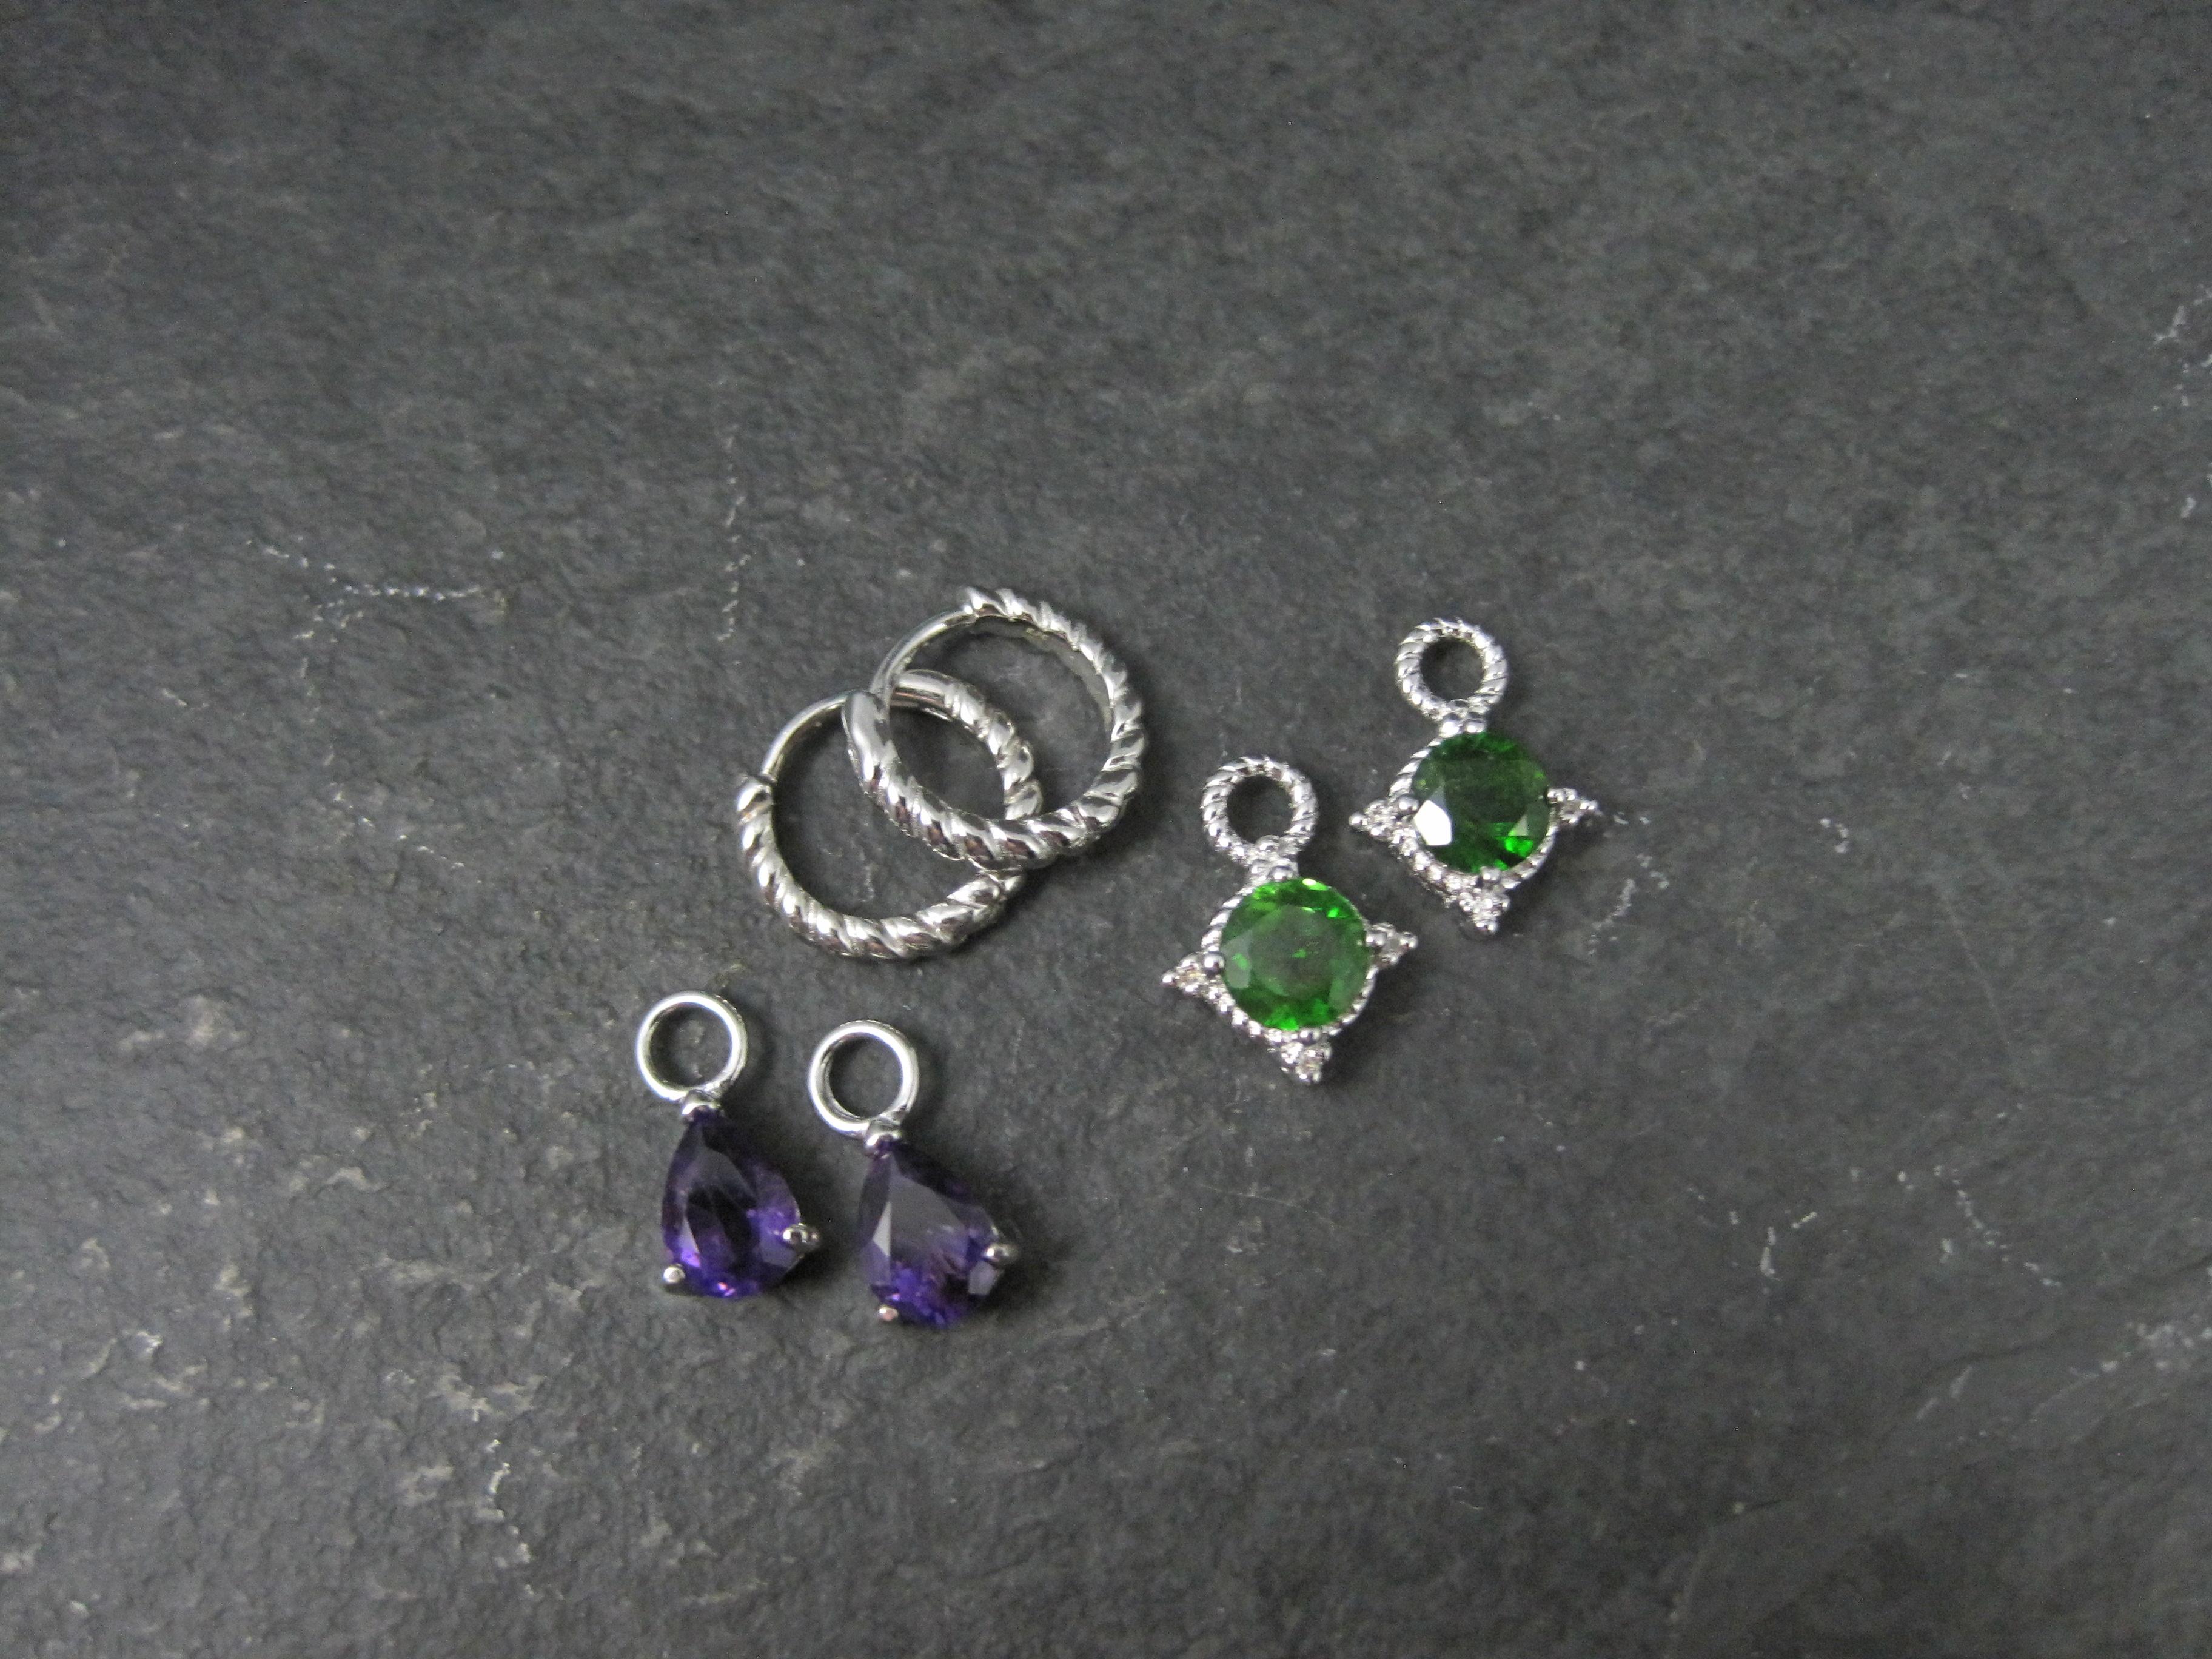 These beautiful hoop earrings are sterling silver. They feature interchangeable sterling silver charms with amethysts and chrome diopside gemstones.

Measurements: The hoop earrings measure 1/2 of an inch. The pear cut amethysts measure 5x7mm. The